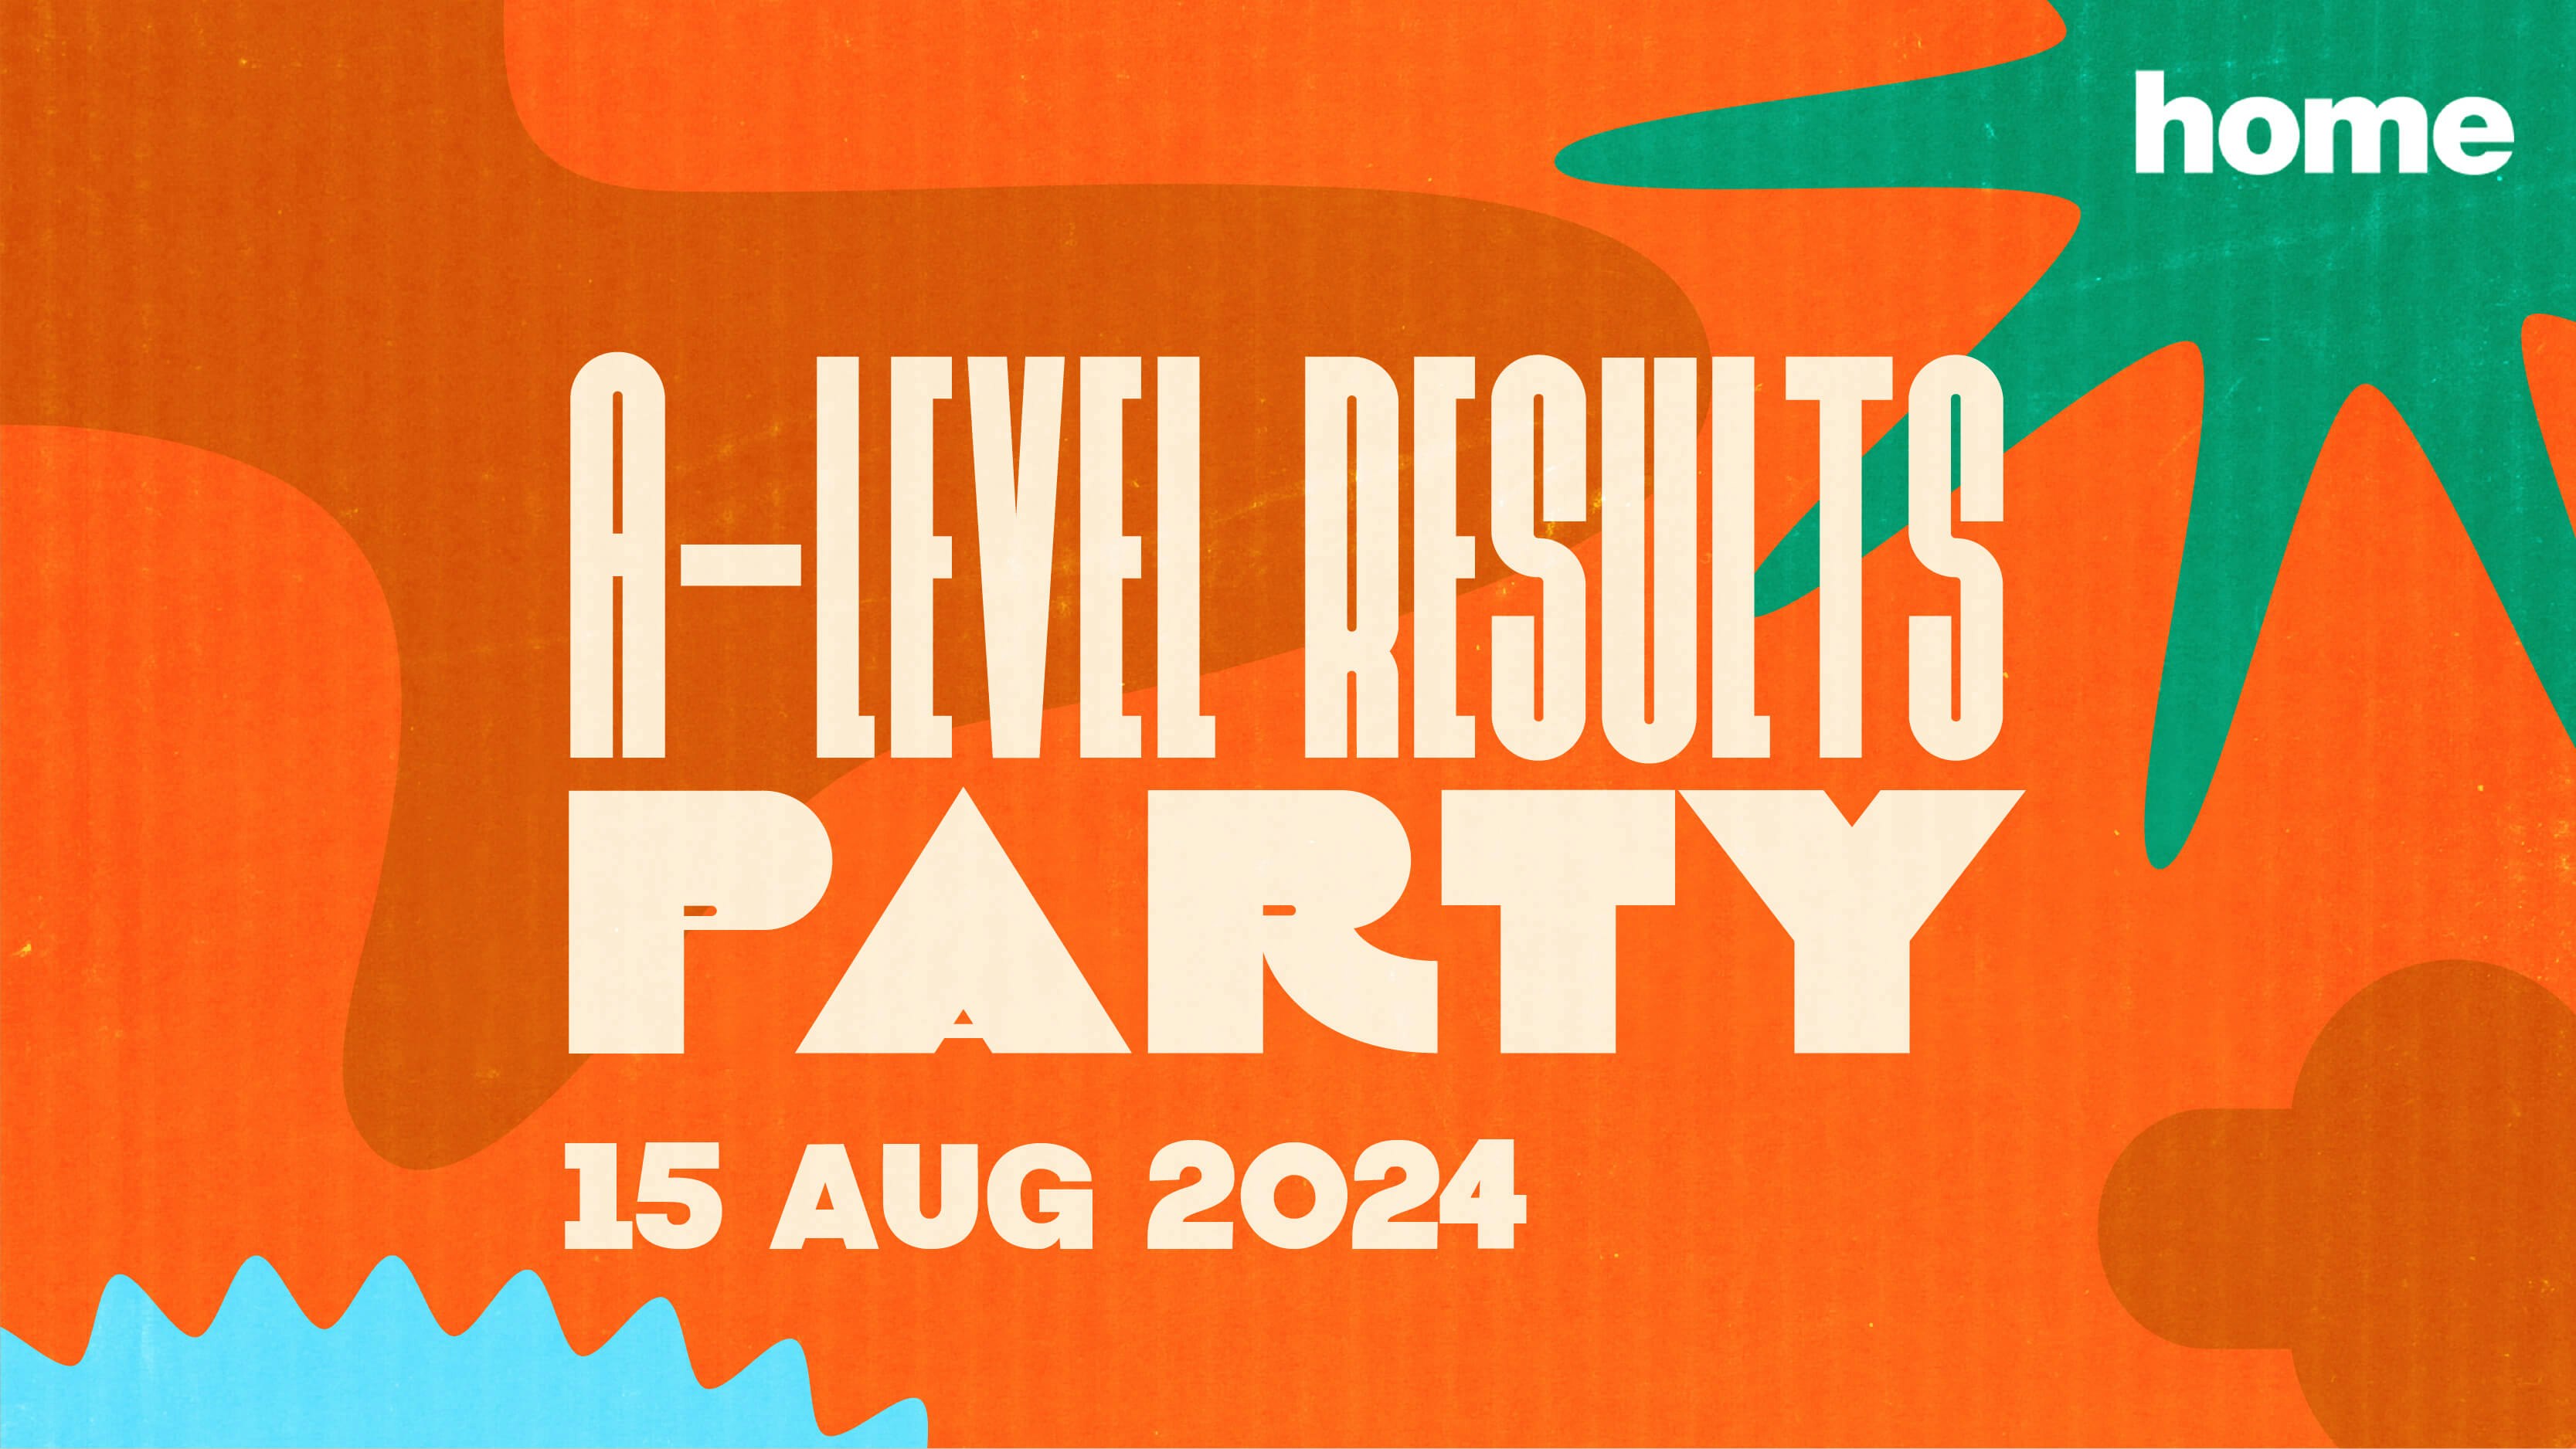 A-LEVEL RESULTS PARTY 2024 – HOME NIGHTCLUB